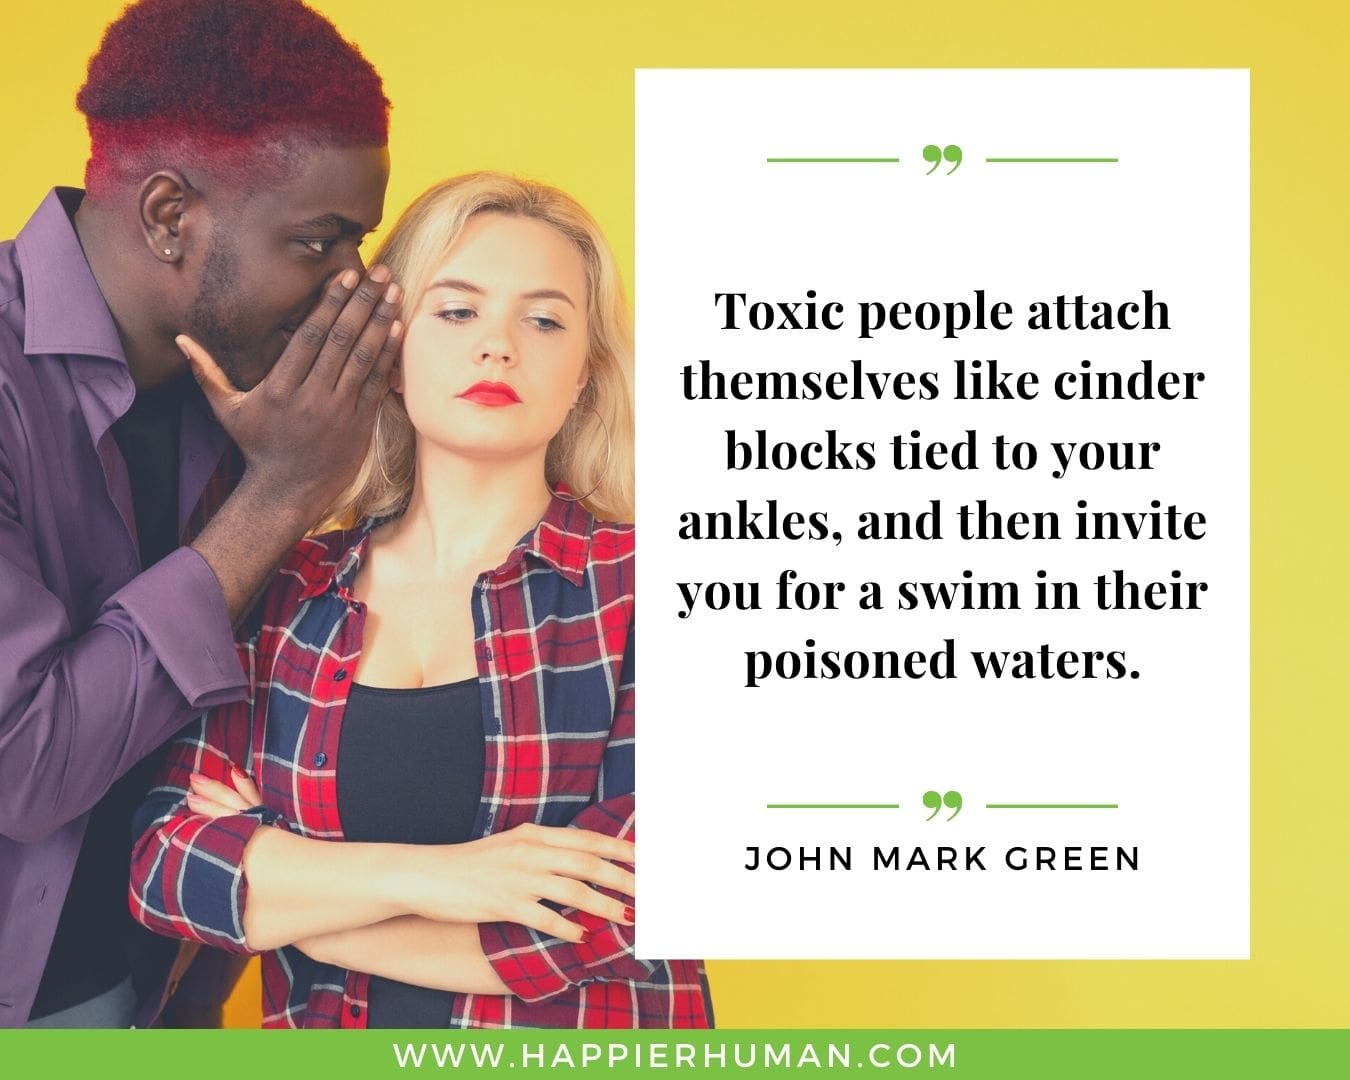 Toxic People Quotes - “Toxic people attach themselves like cinder blocks tied to your ankles, and then invite you for a swim in their poisoned waters.” – John Mark Green